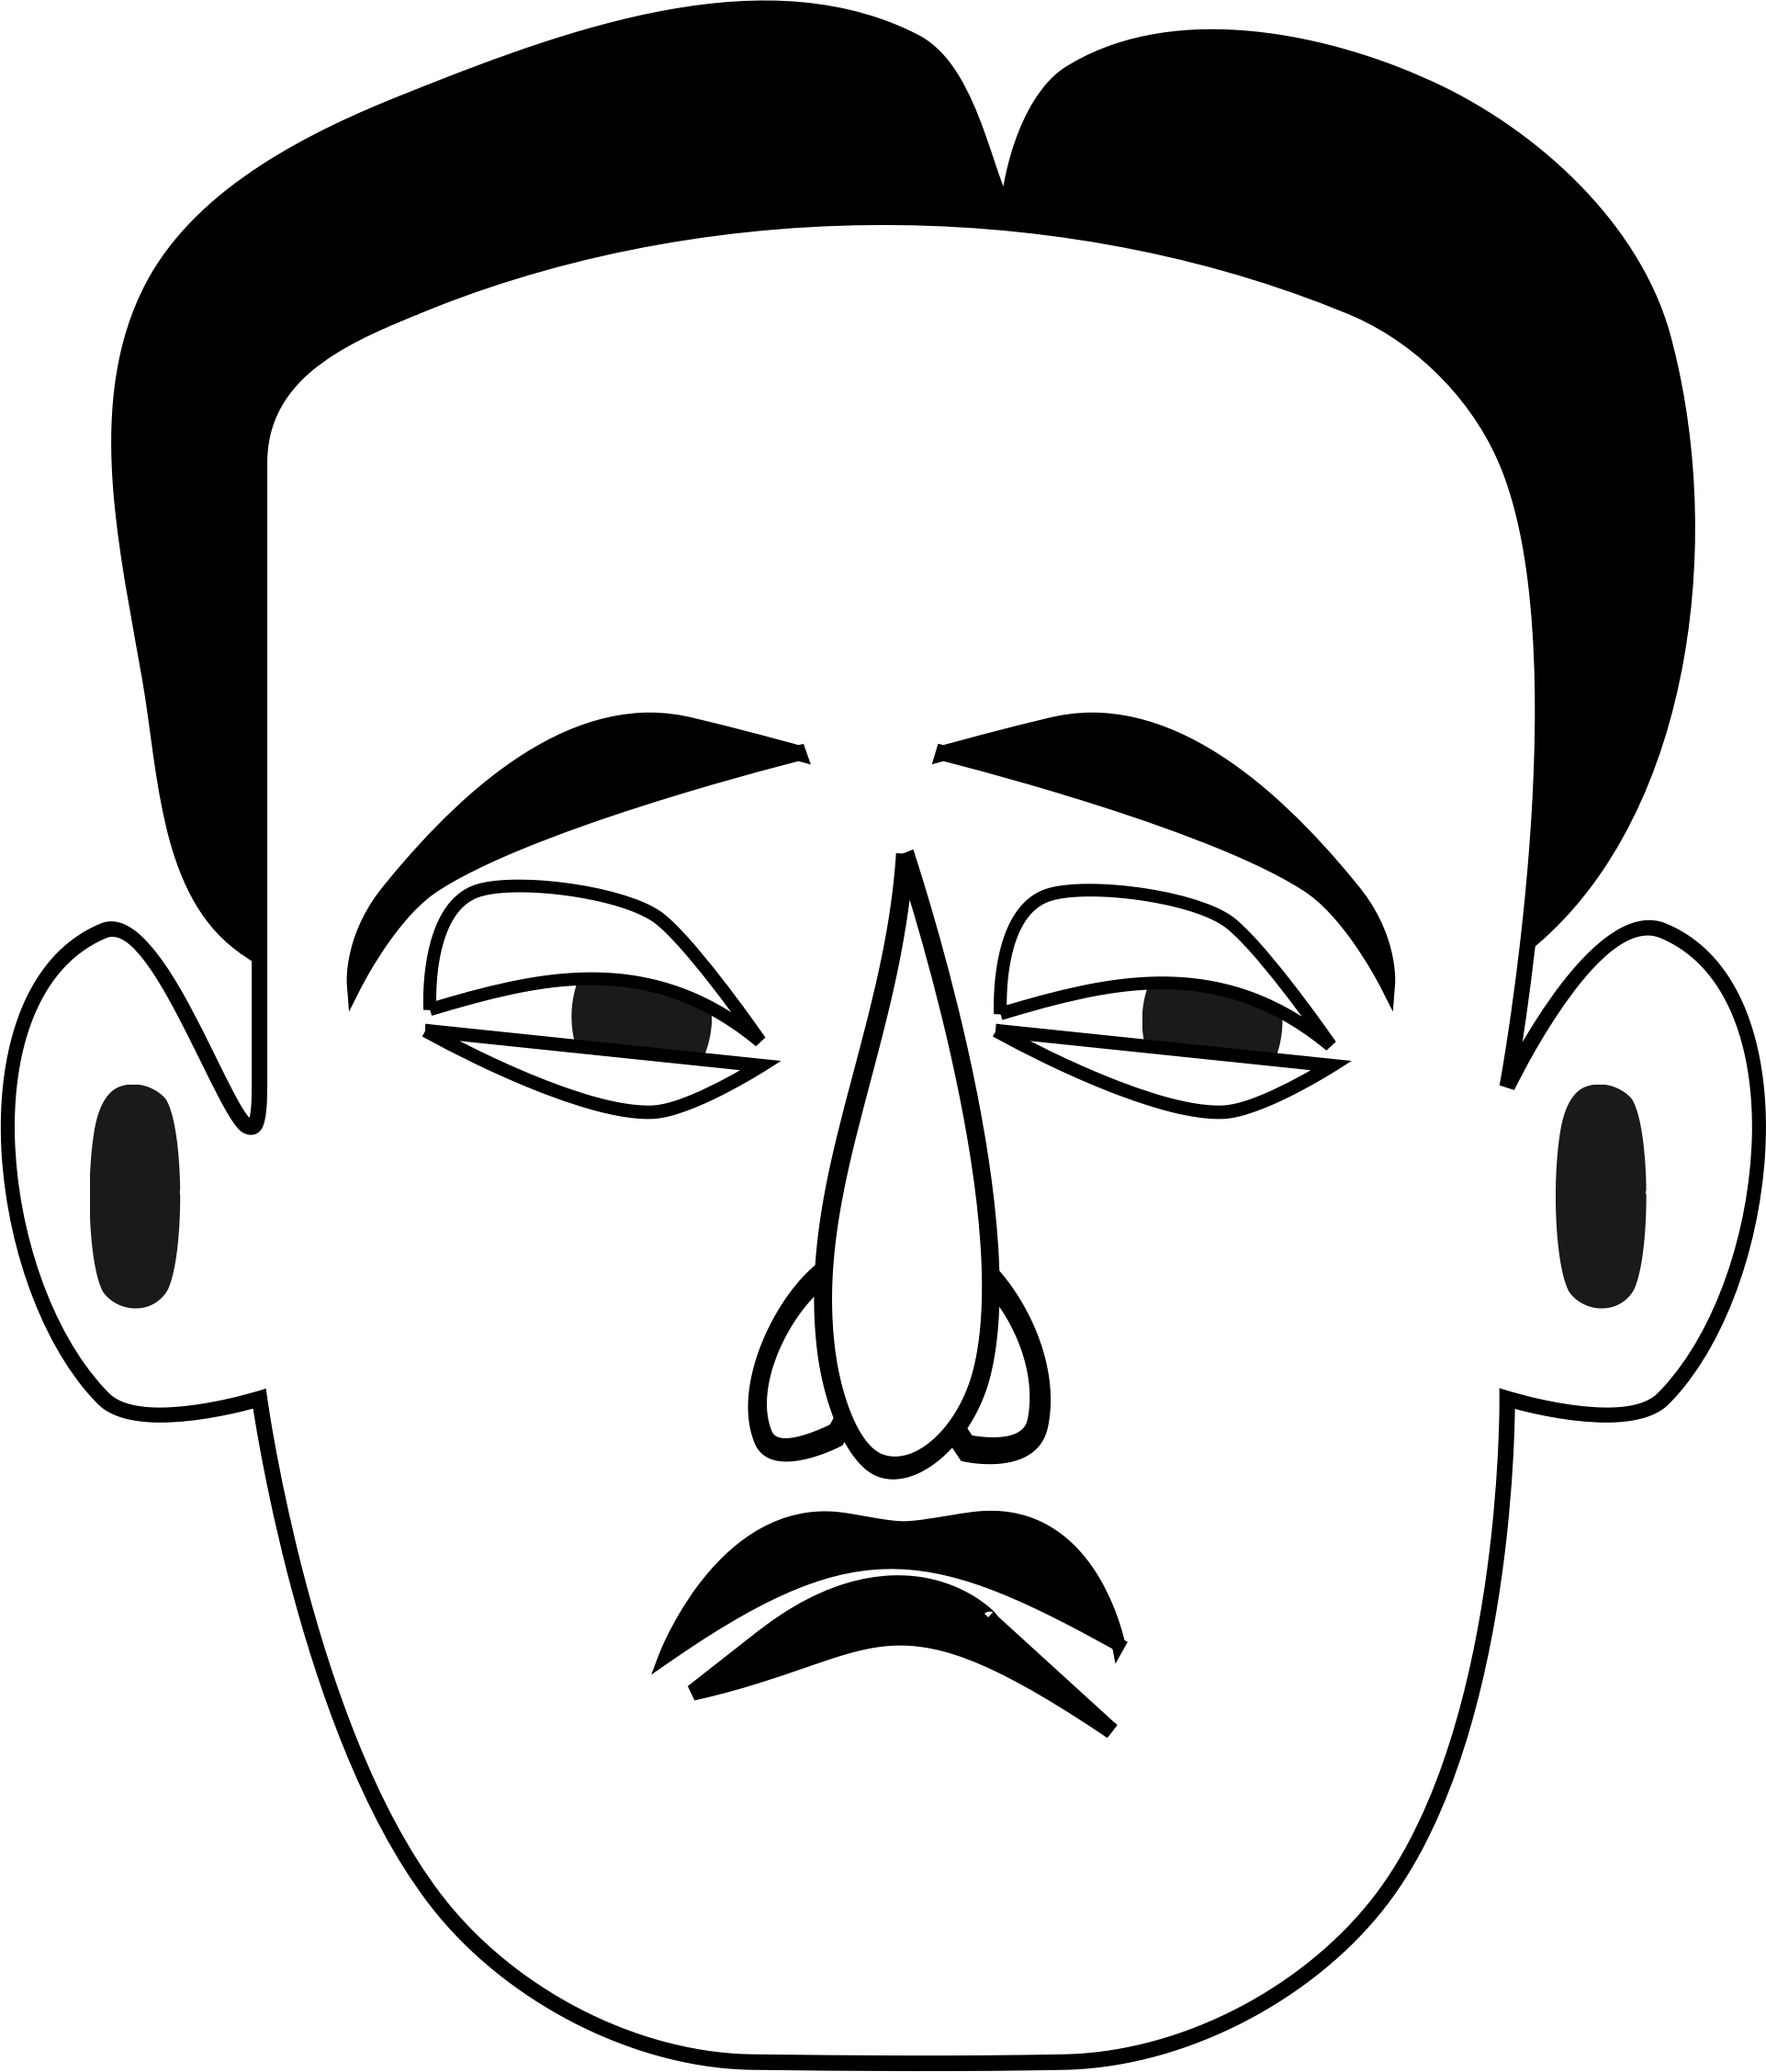 Sad Person Drawing - ClipArt Best